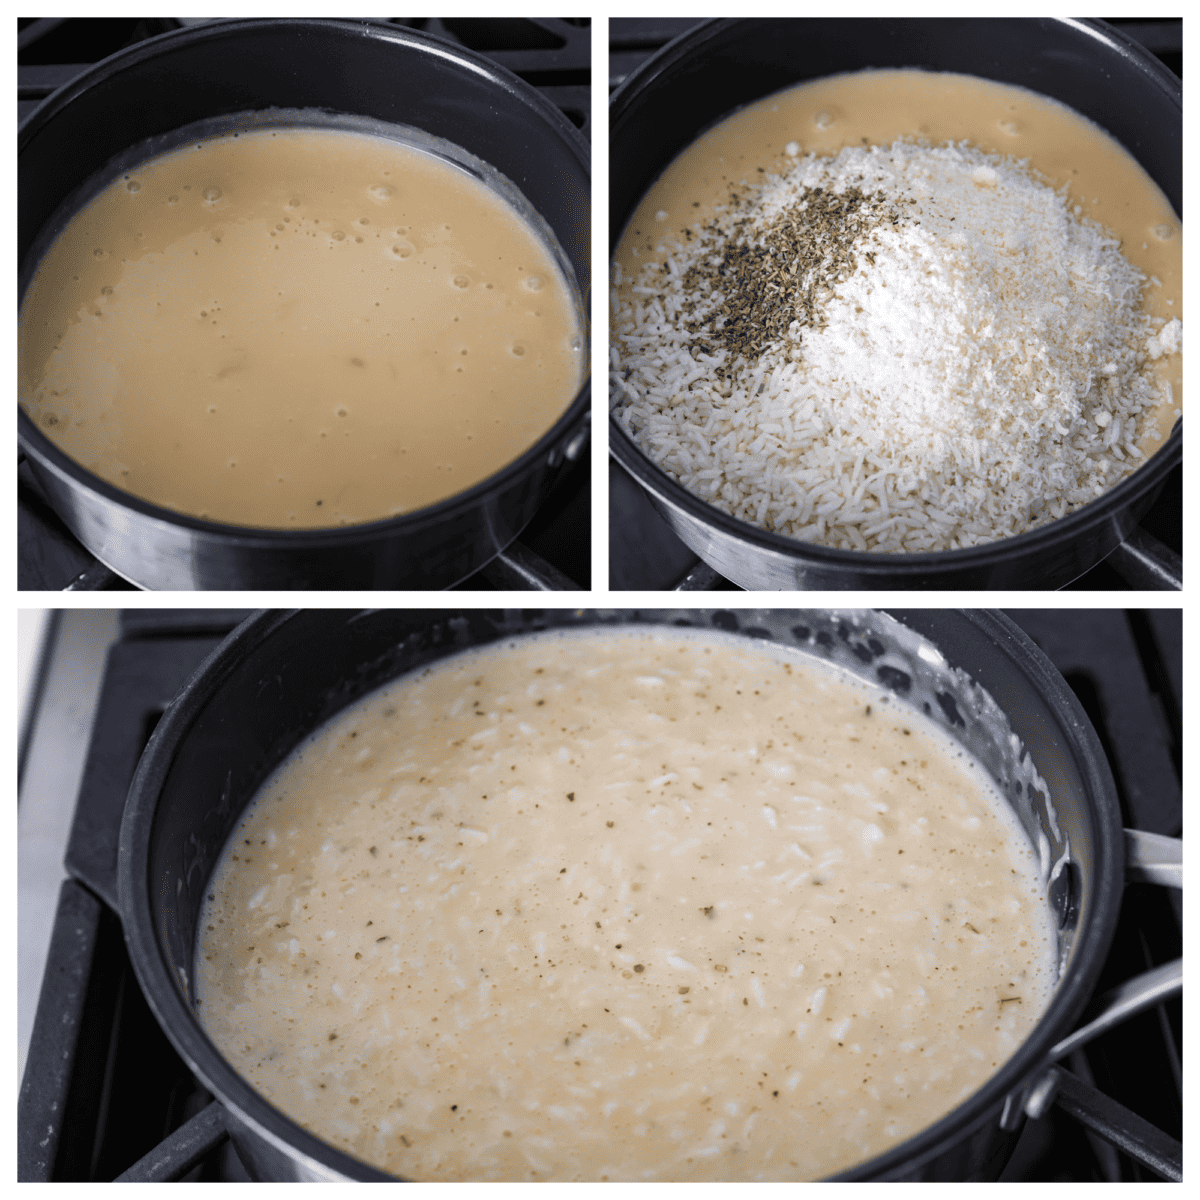 3 pictures in a collage showing a pot on the stove and the rice, soup and seasonings being added to it. 